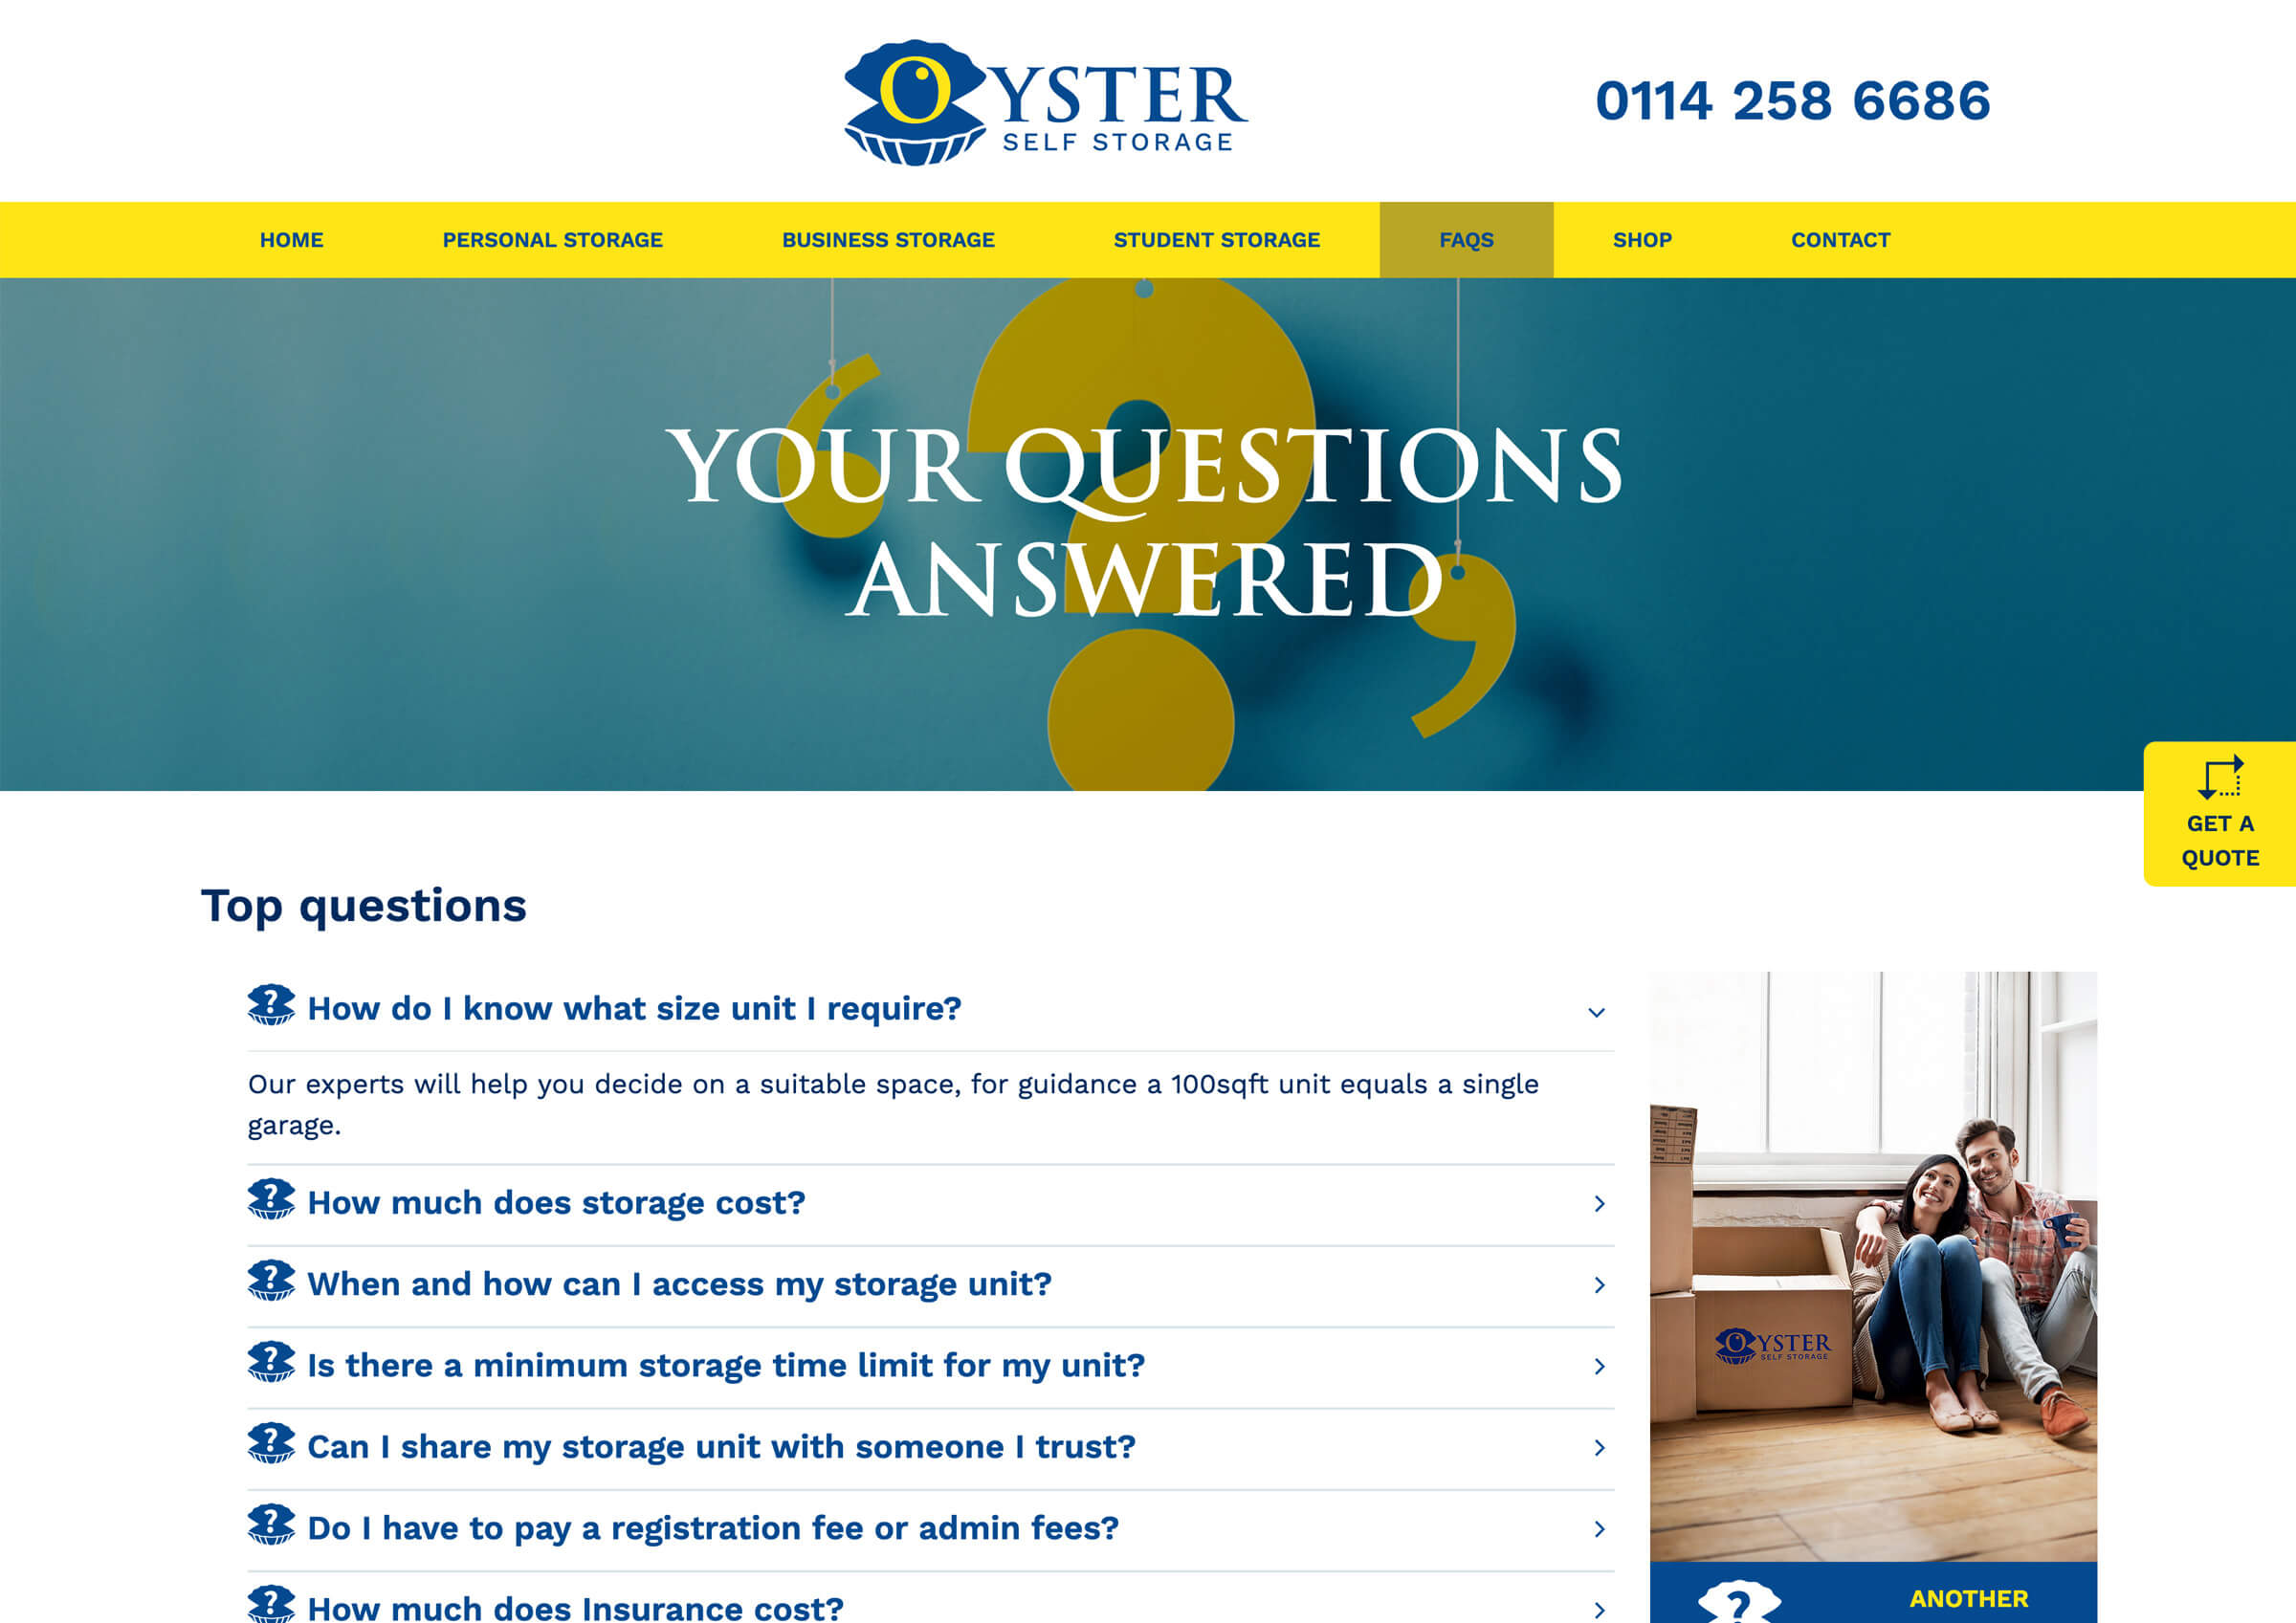 Oyster Self Storage website design for Frequent Asked Questions